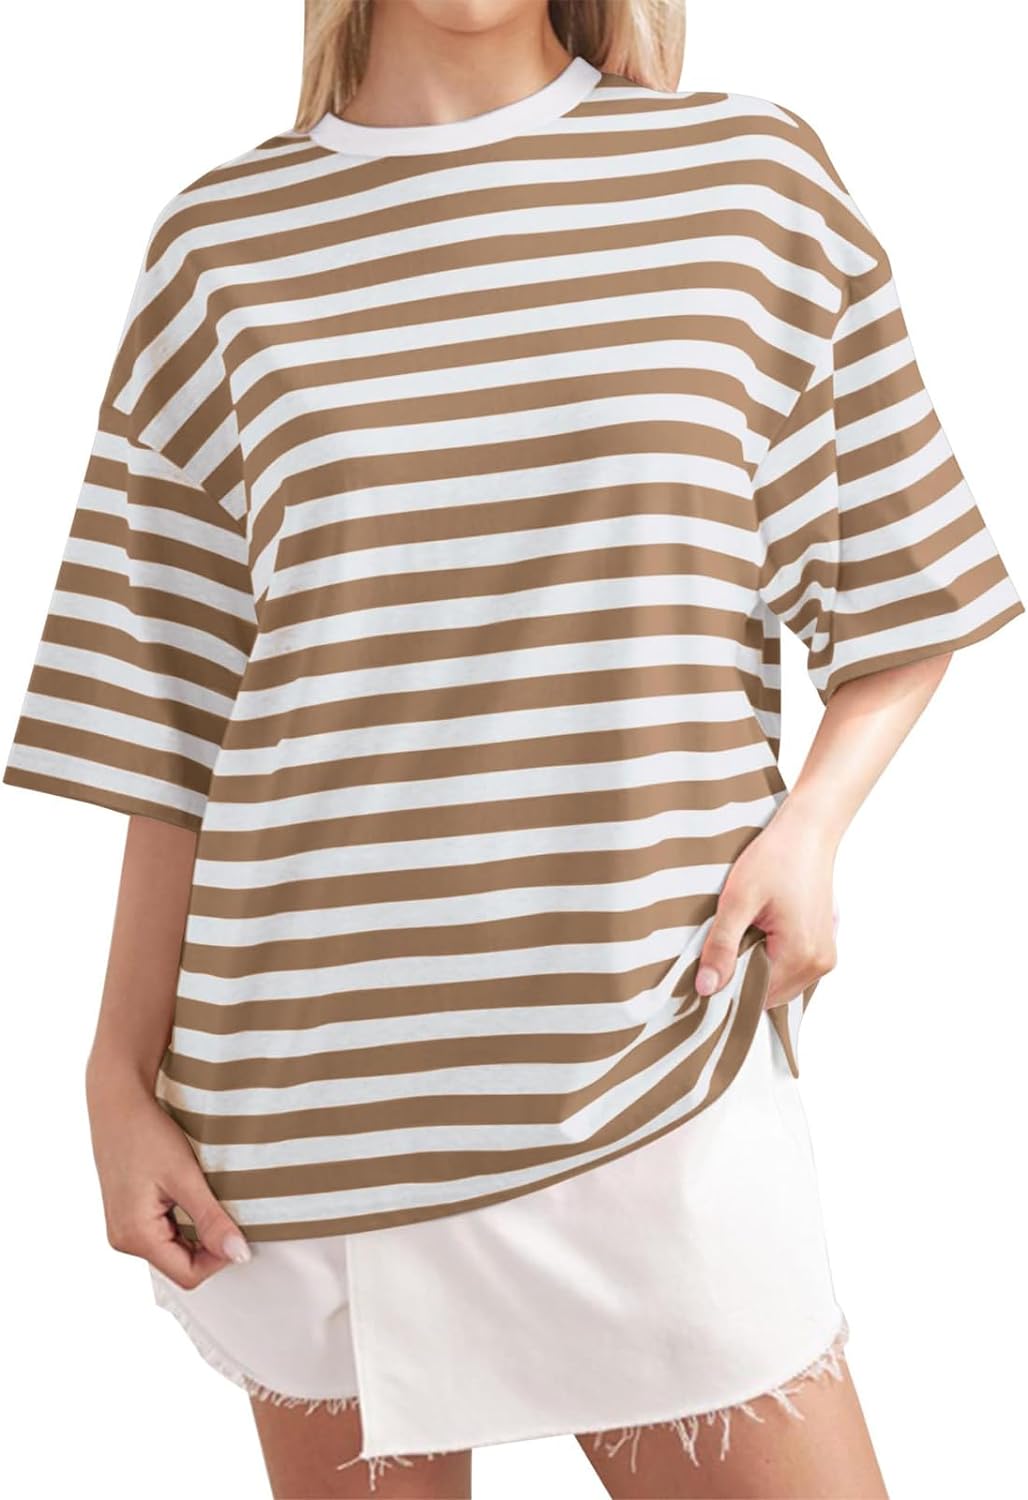 Women Oversized Striped Color Block Shirt Short Sleeve Crew Neck T-Shirts Casual Loose Pullover Tops Summer Tee Tops